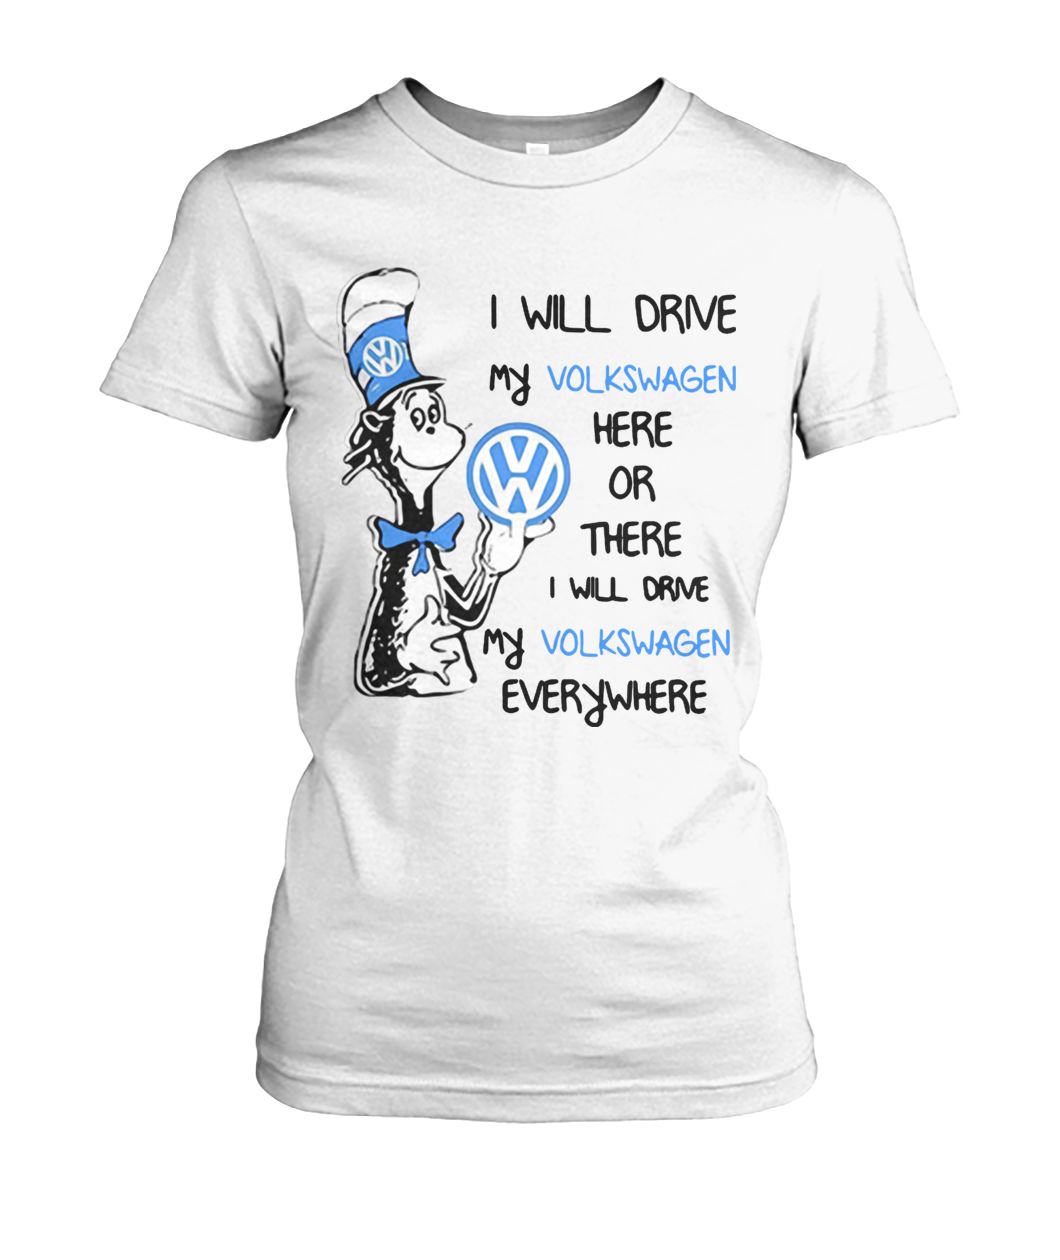 Dr seuss I will drive my volkswagen here or there I will drive my volkswagen everywhere women's crew tee